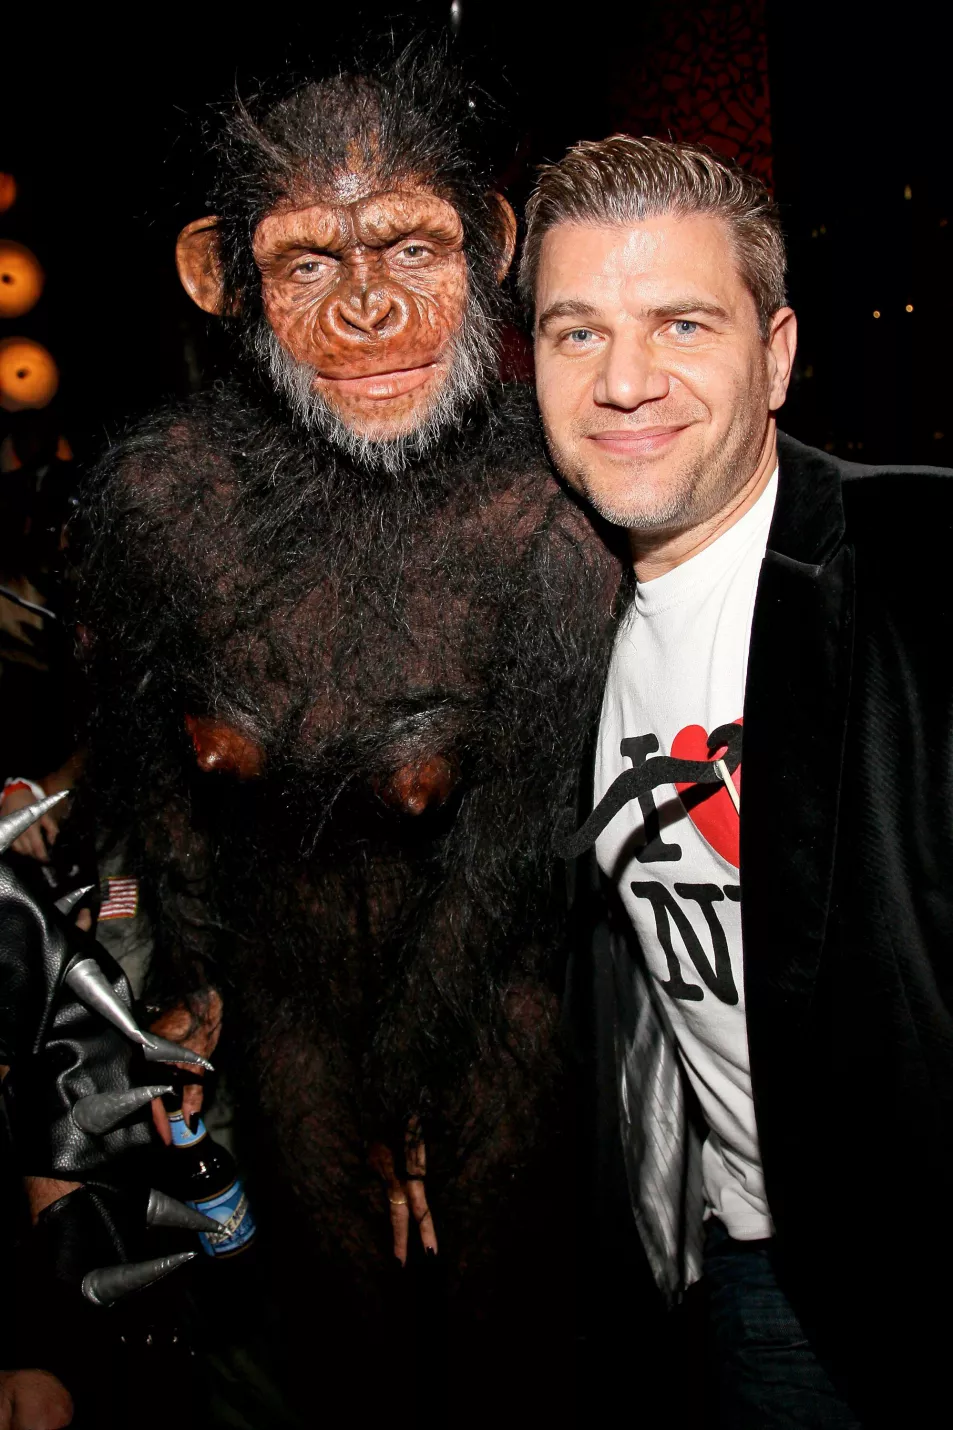 Heidi Klum poses with a fan while dresses as an ape for Halloween 2013